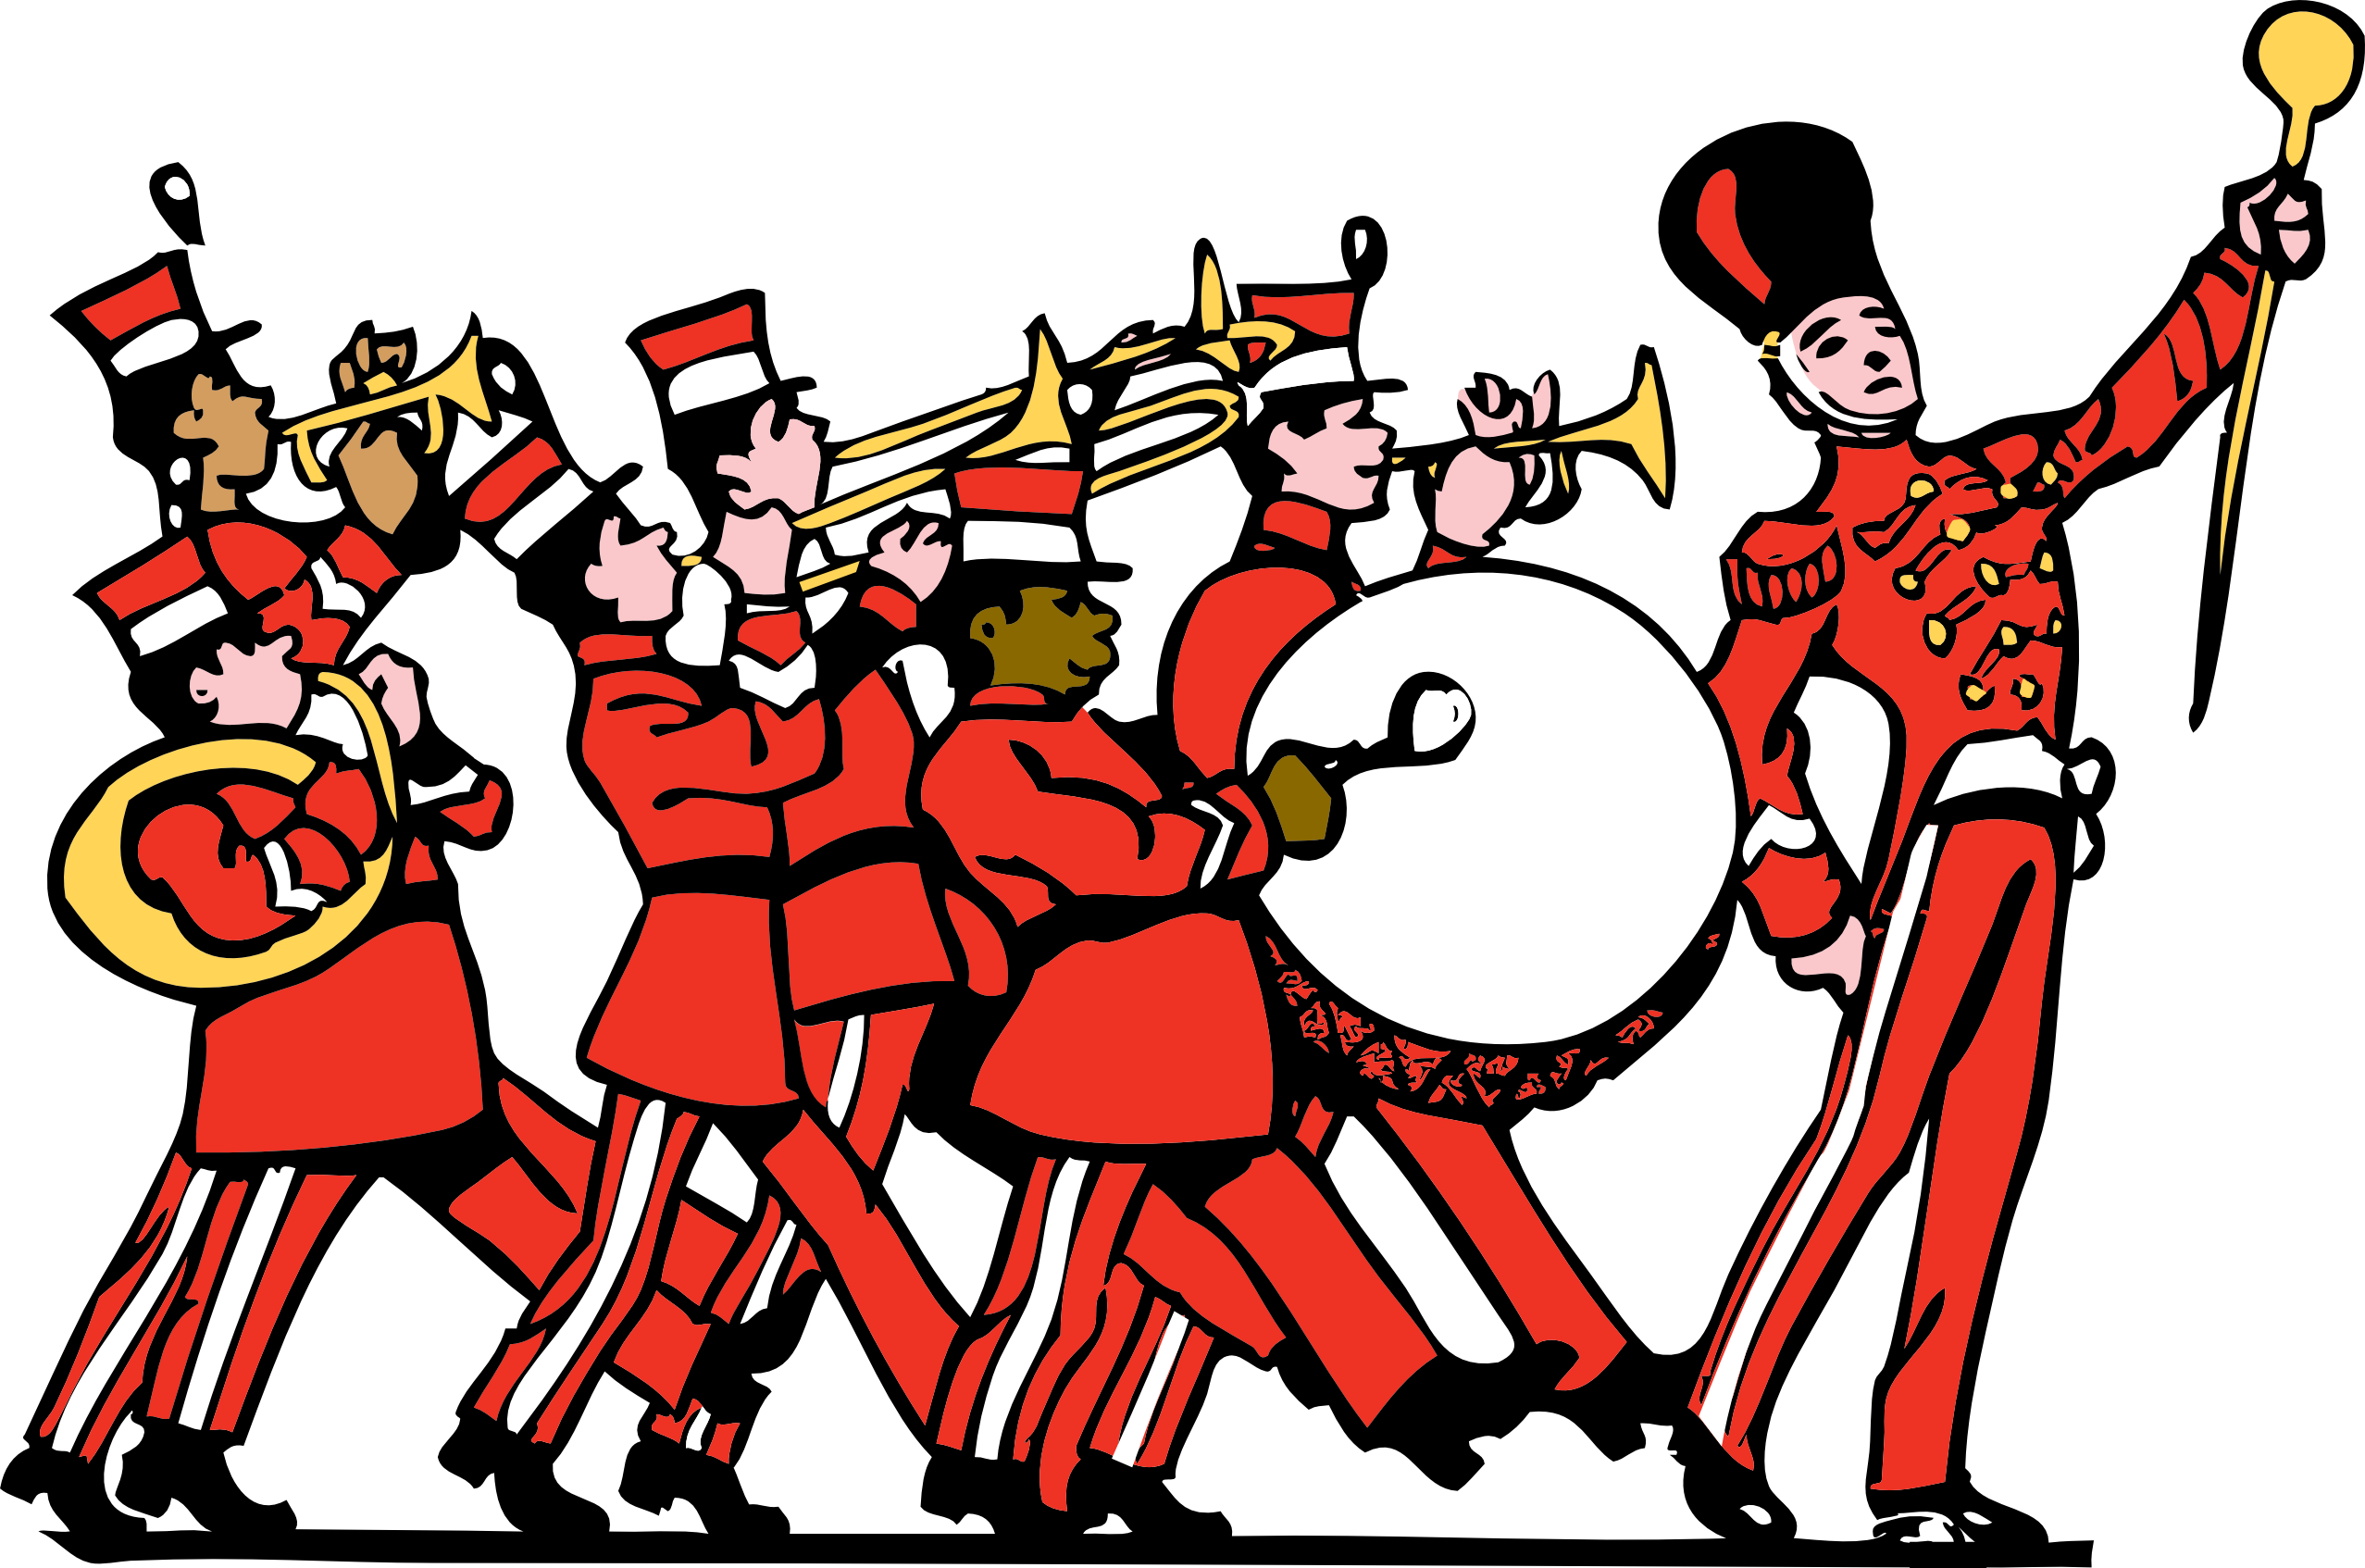 festival clipart band orchestra